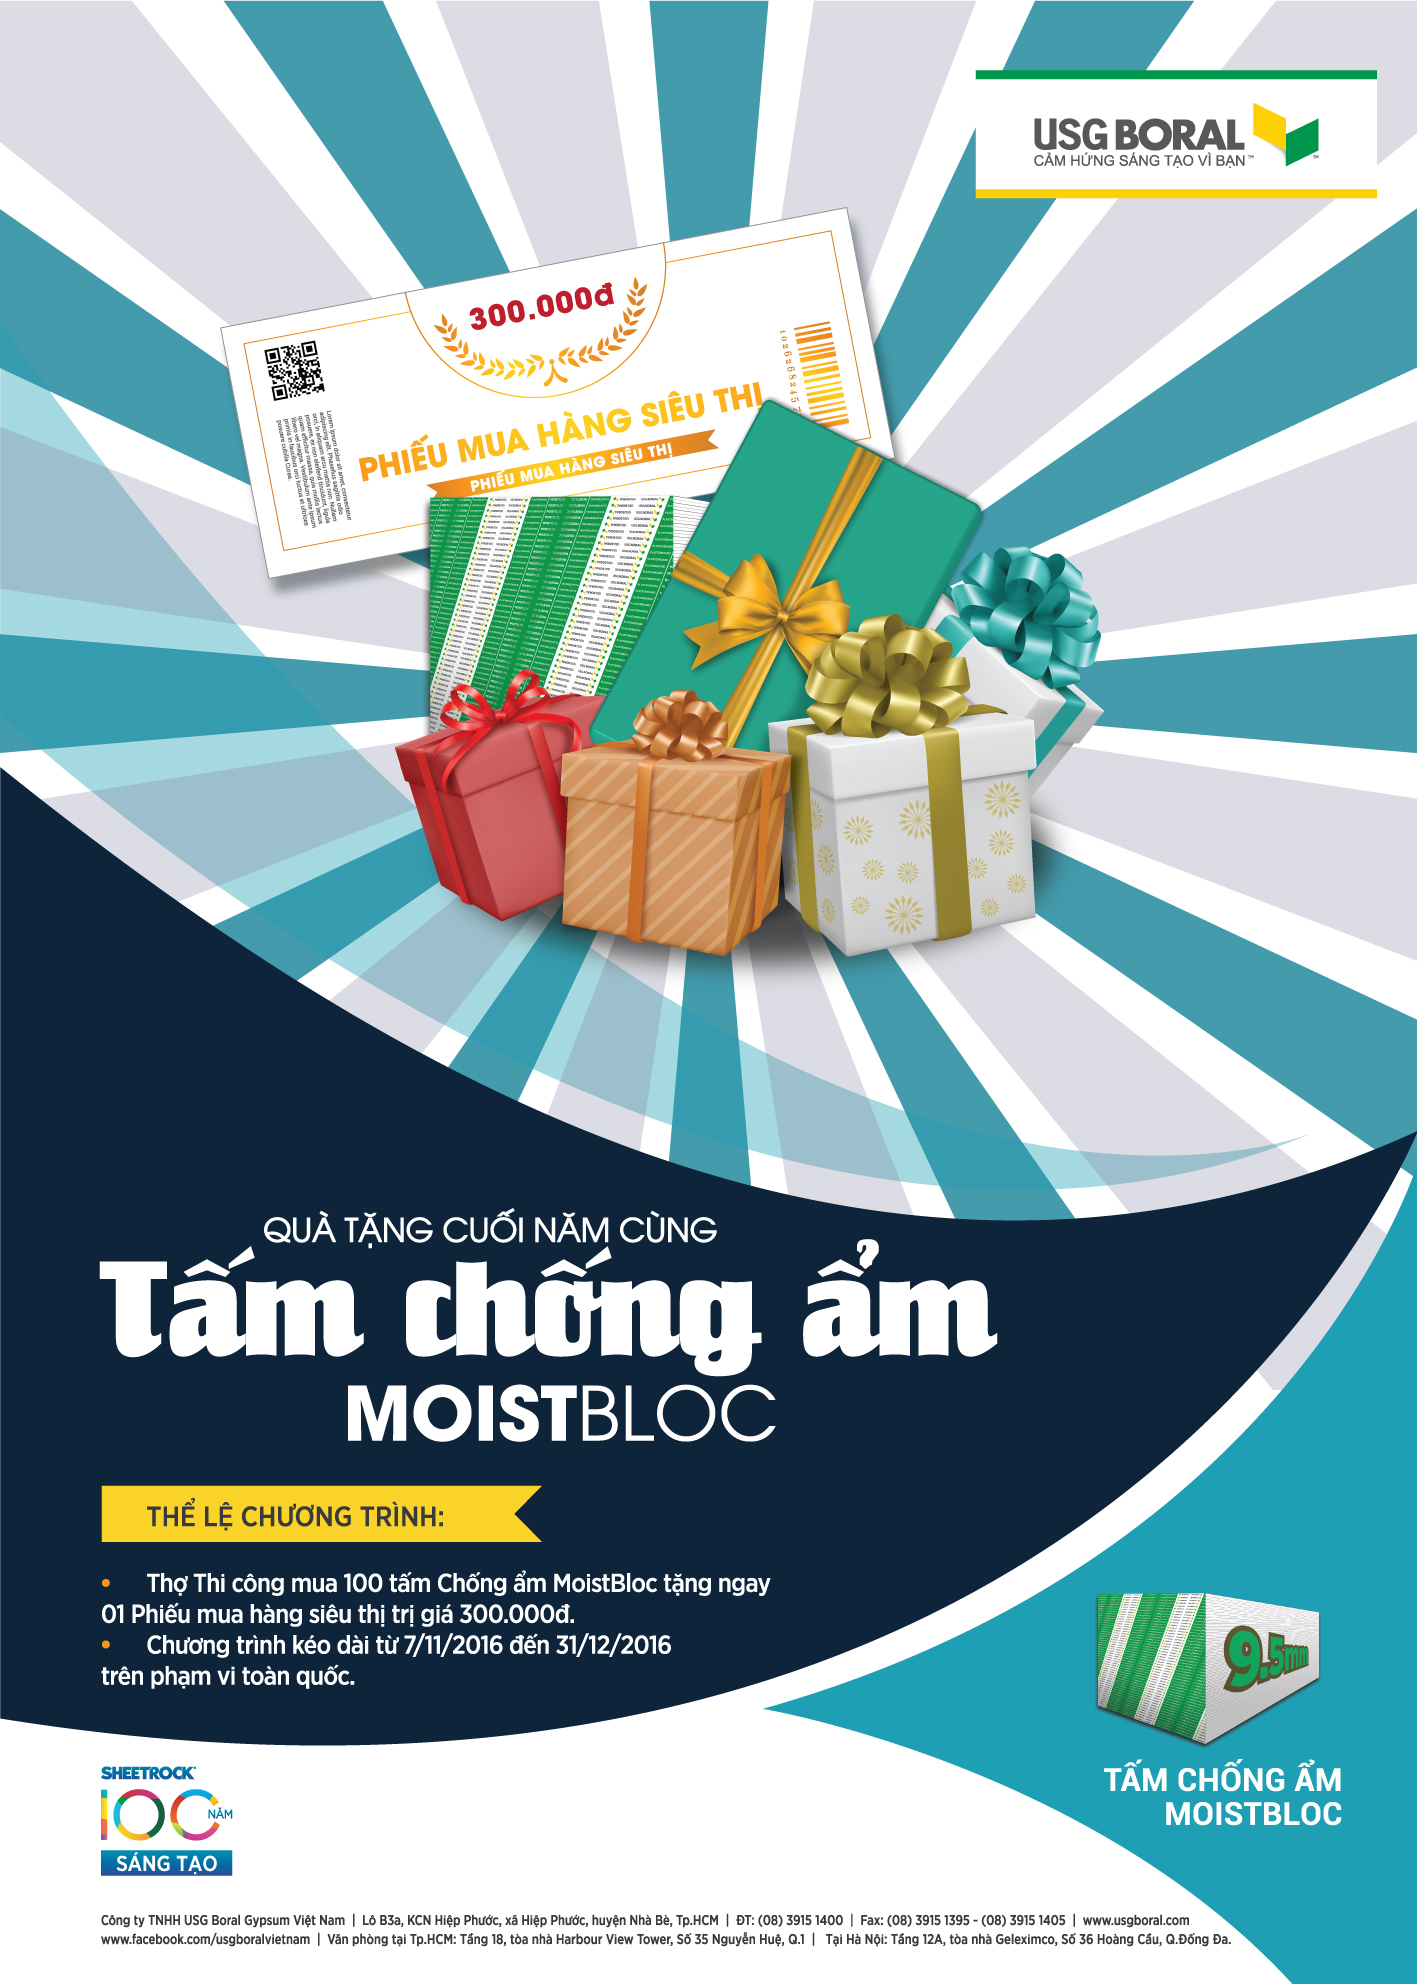 Gifts at the end of 2016 with MOISTBLOC gypsum board